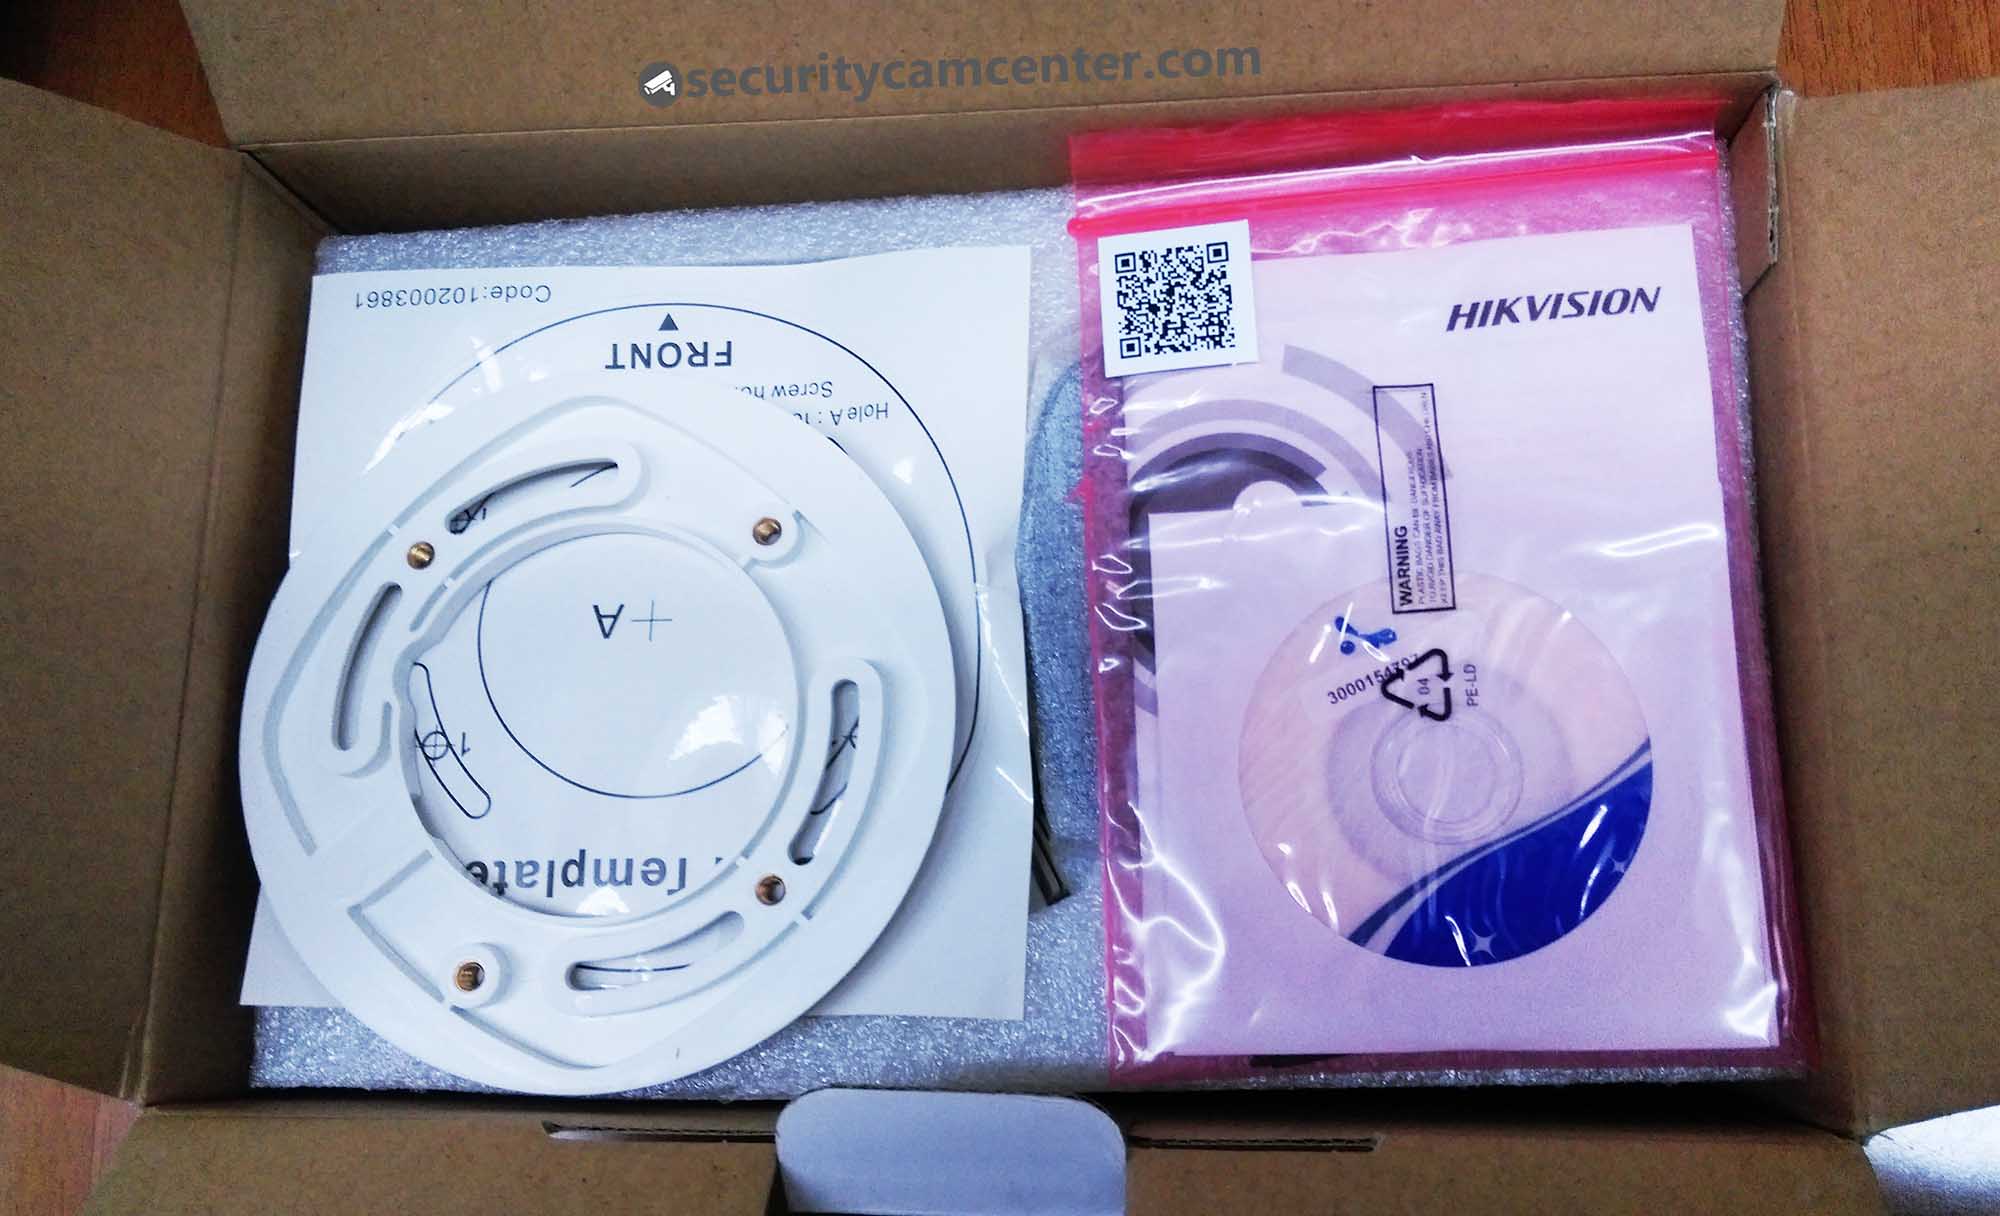 Opening up the Hikvision DS-2CD2542FWD-IWS USA retail box.